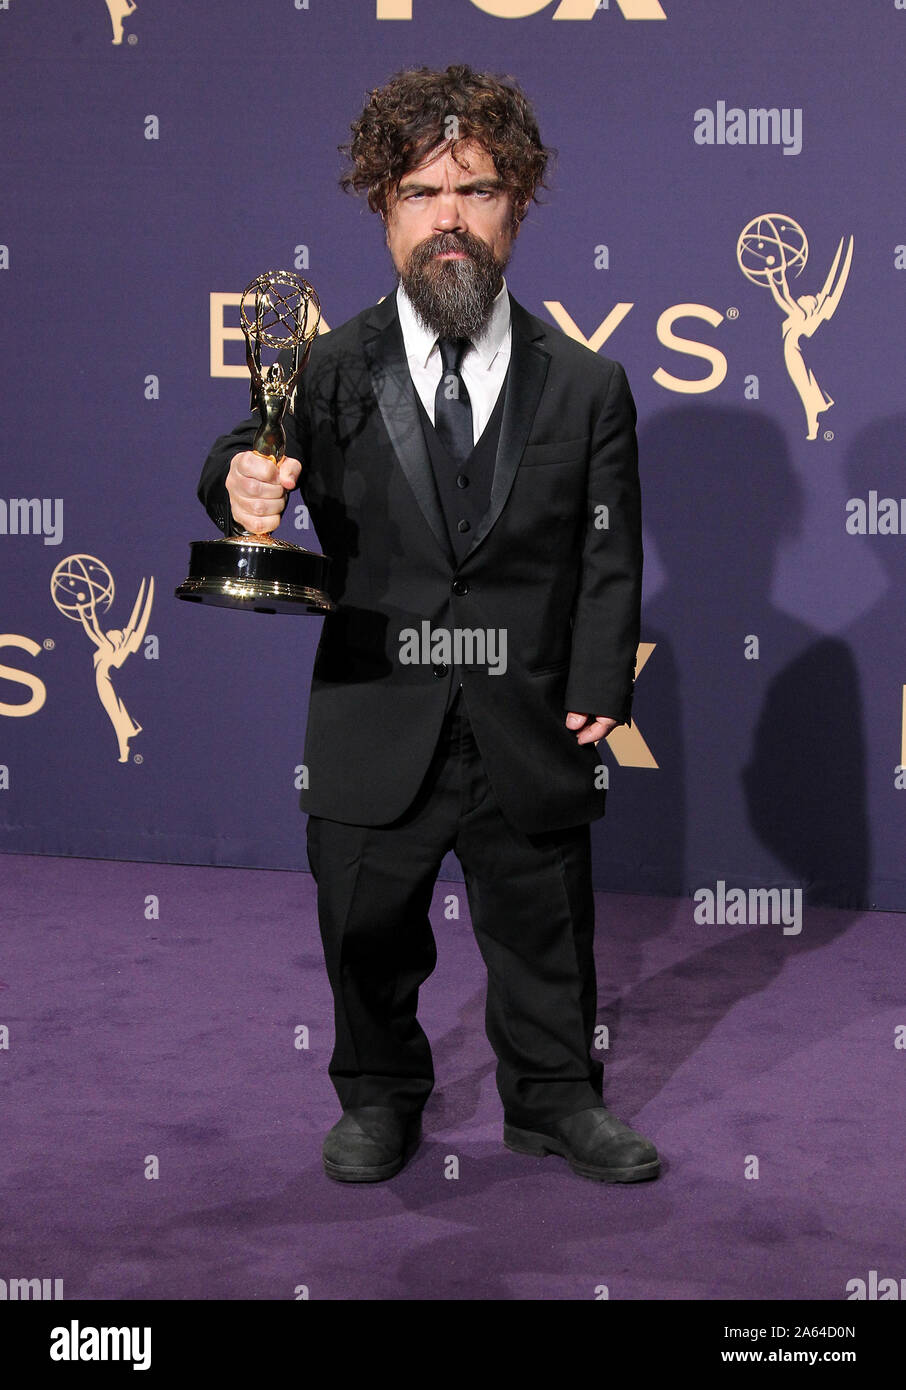 The Wertzone: Peter Dinklage wins Emmy Award for GAME OF THRONES